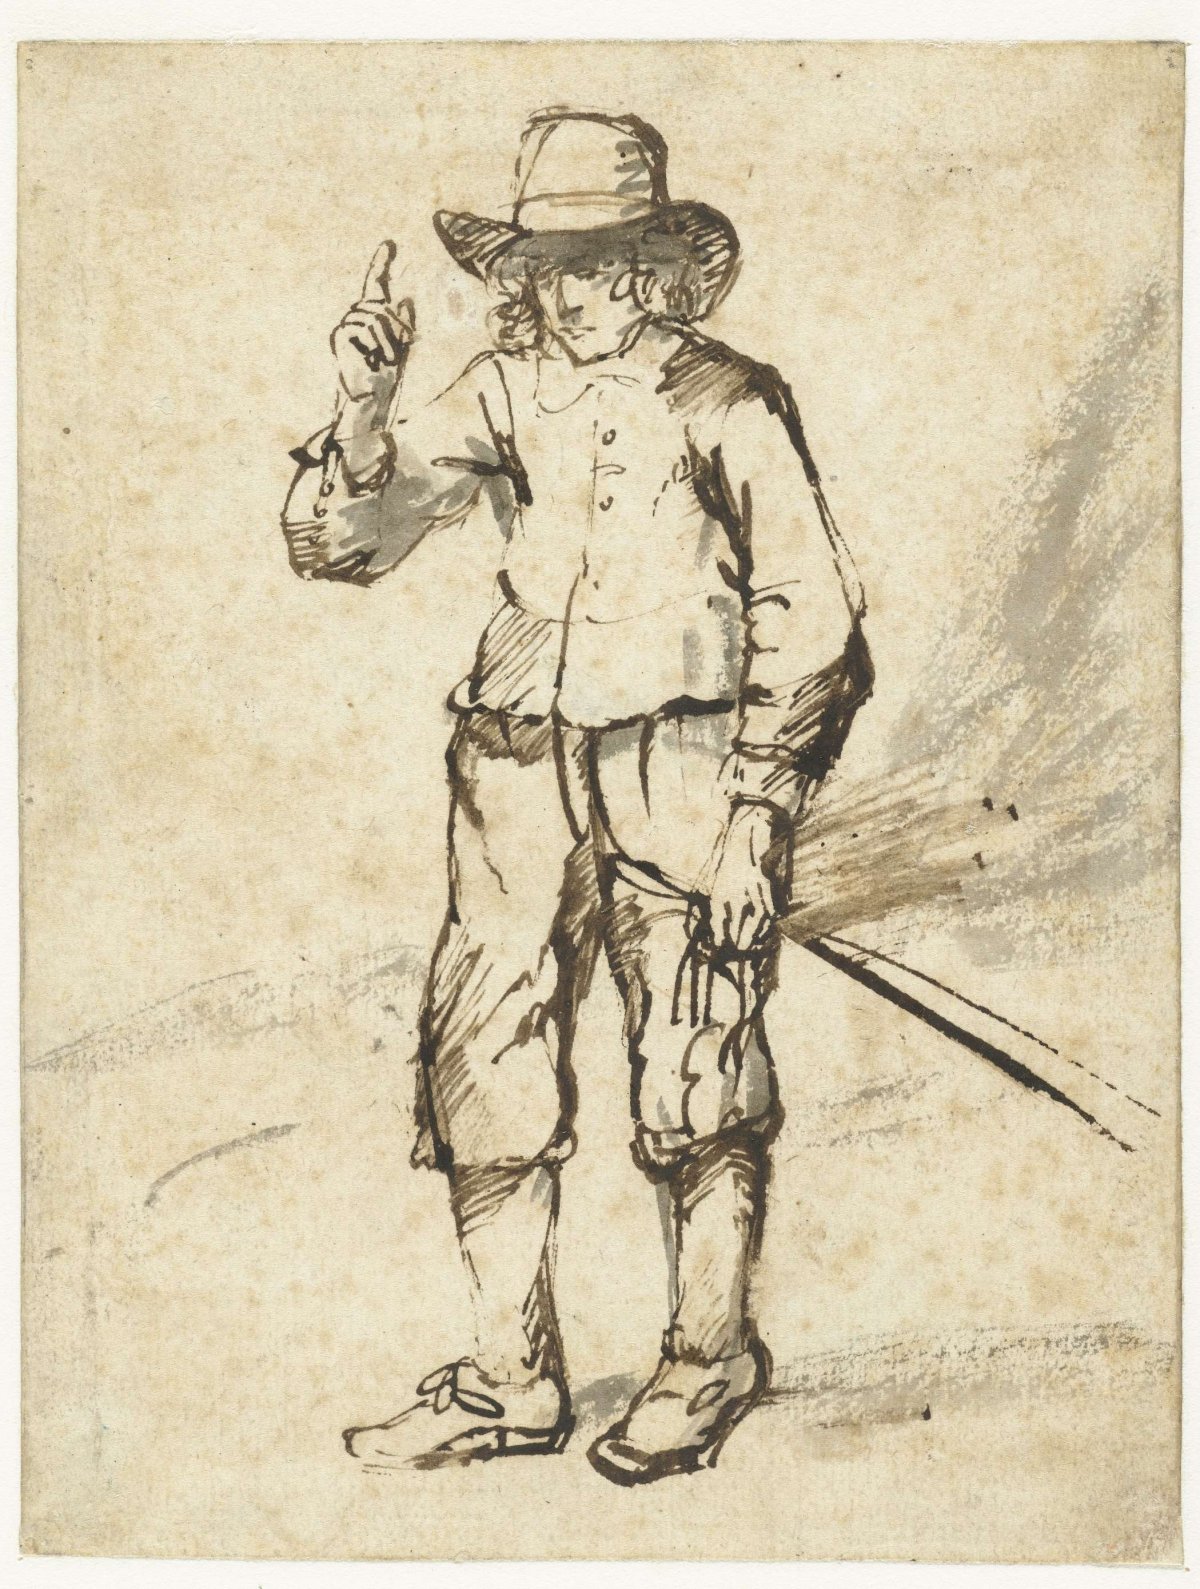 Standing Boy Holding a Whip and Raising his Right Hand, Rembrandt van Rijn, c. 1640 - c. 1650